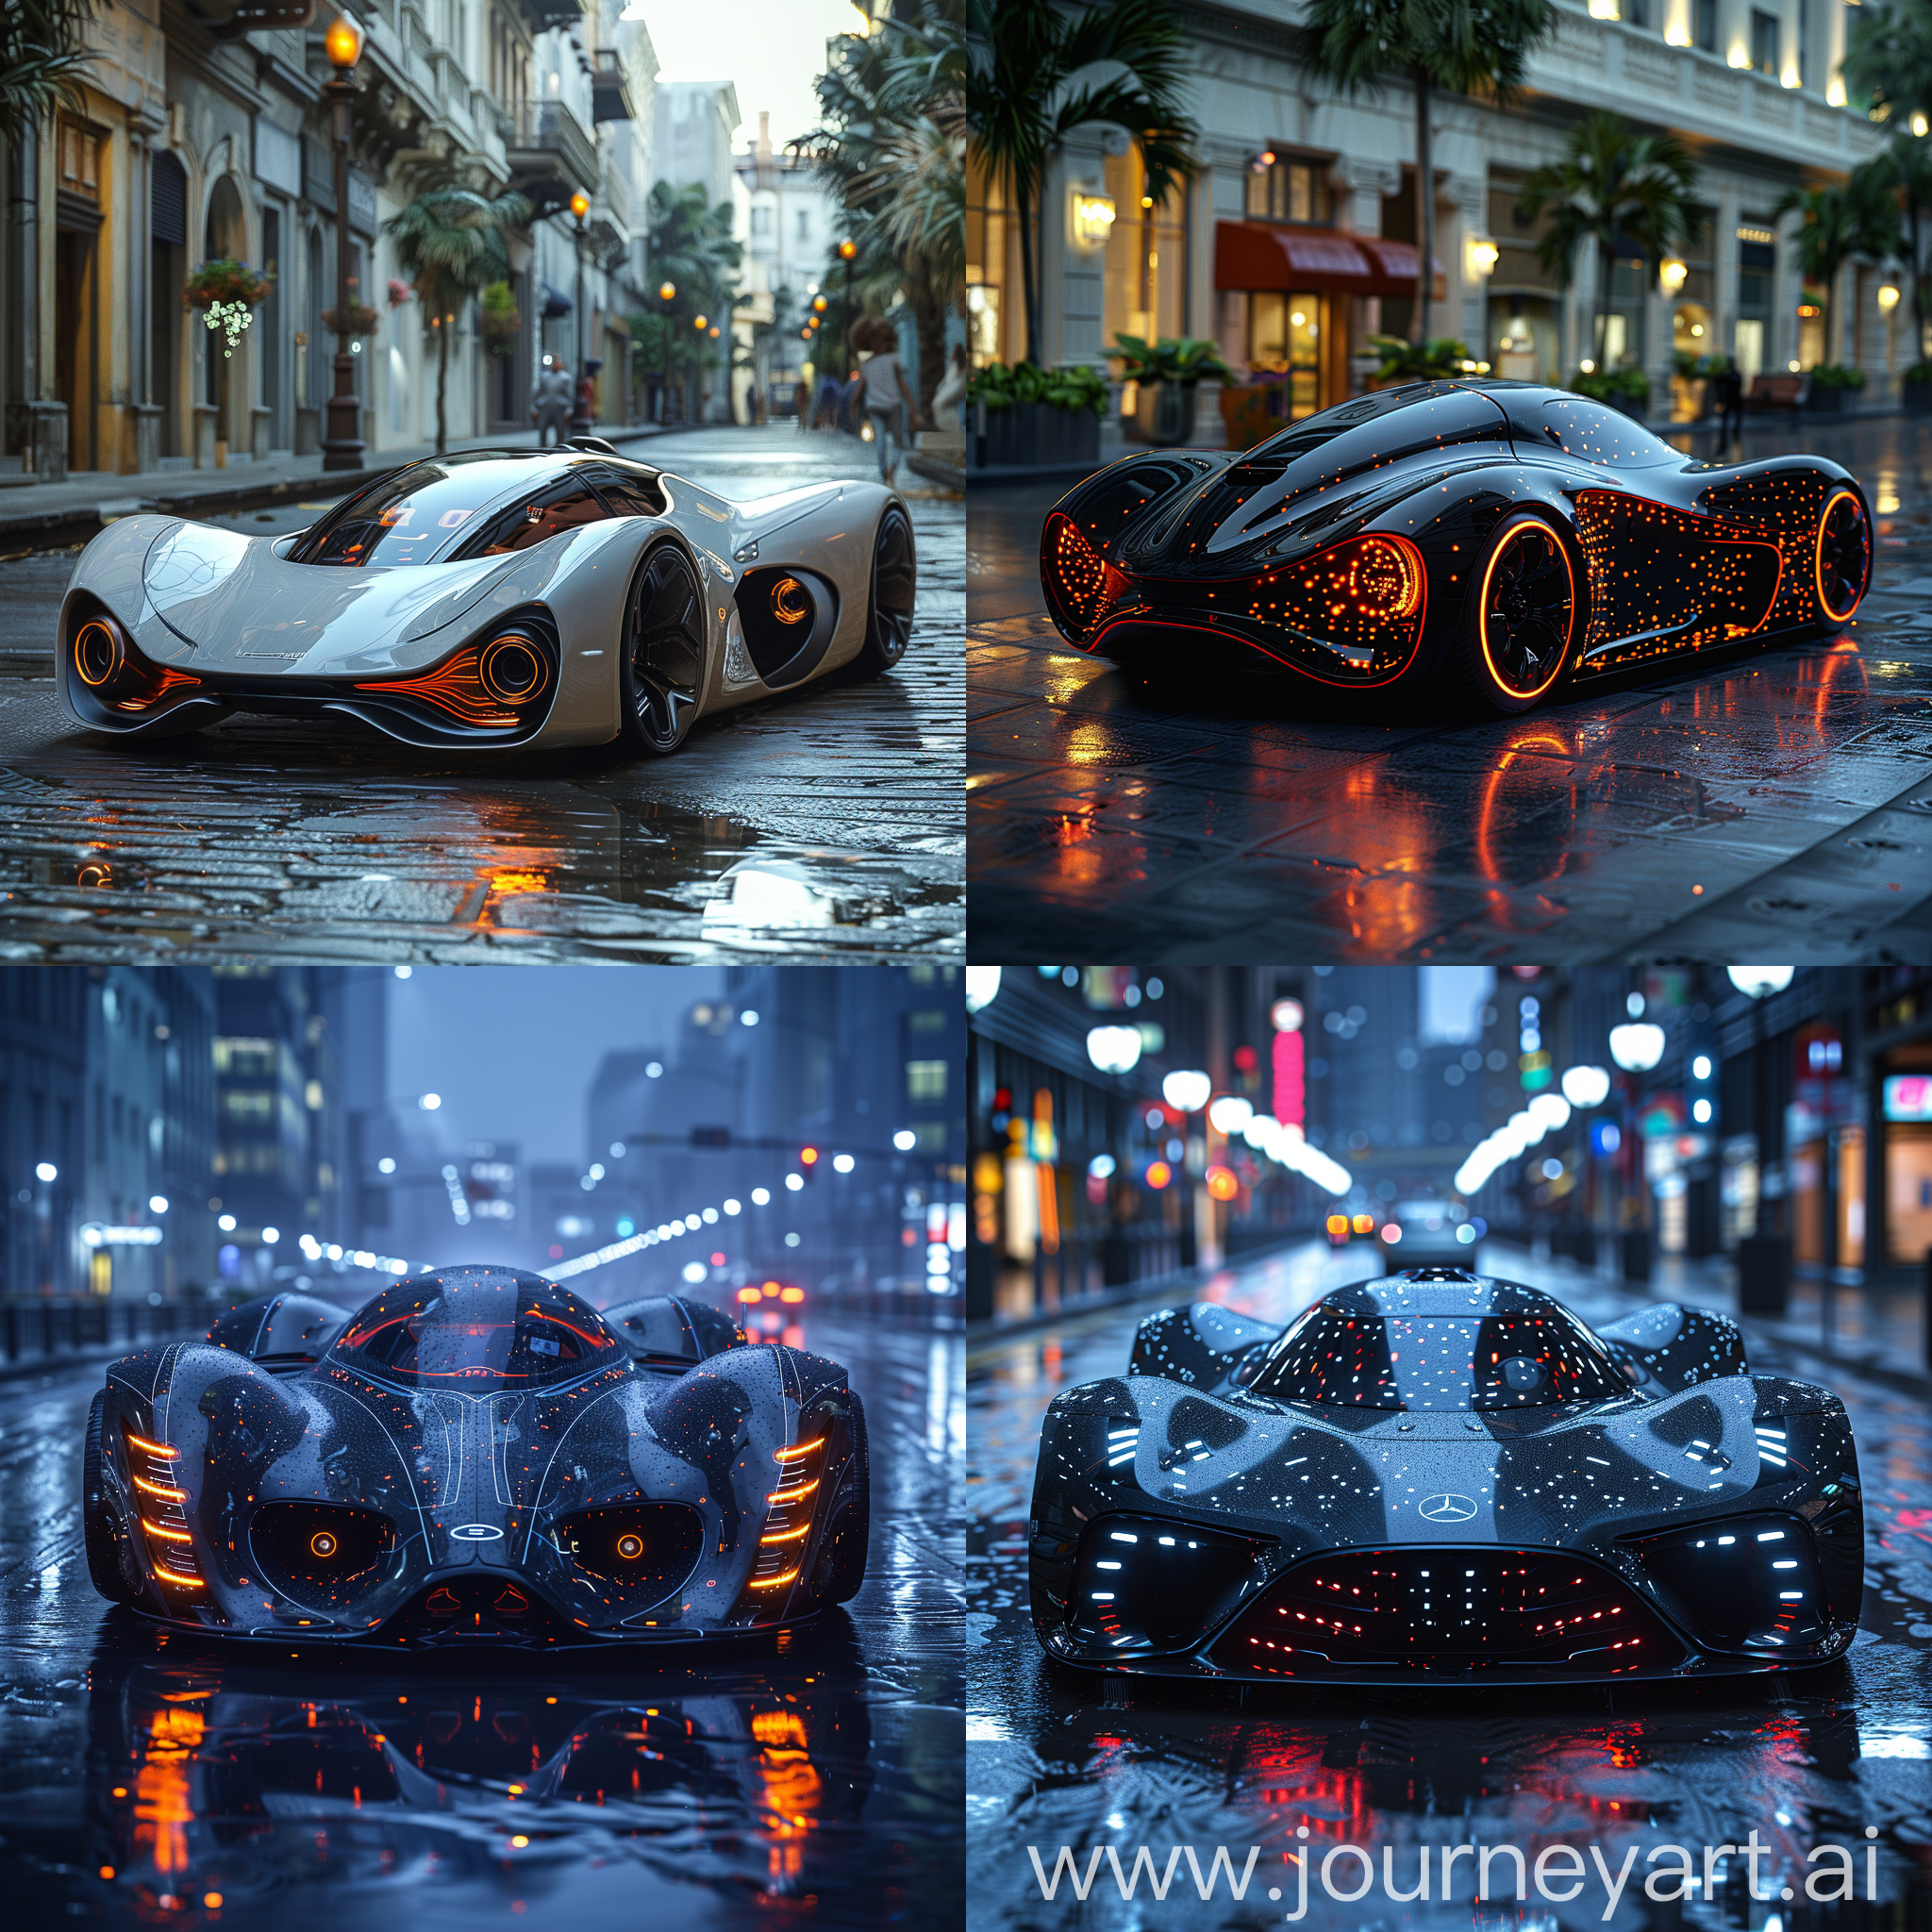 Ultramodern, futuristic car, Self-Driving Technology, Personalized Interiors, Augmented Reality Windshield, Kinetic Energy Harvesting, Shape-Shifting Body Panels, AI Assistant, Biometric  Security, Self-Healing Paint, Holographic  Displays, Environmentally Friendly, octane render --stylize 1000